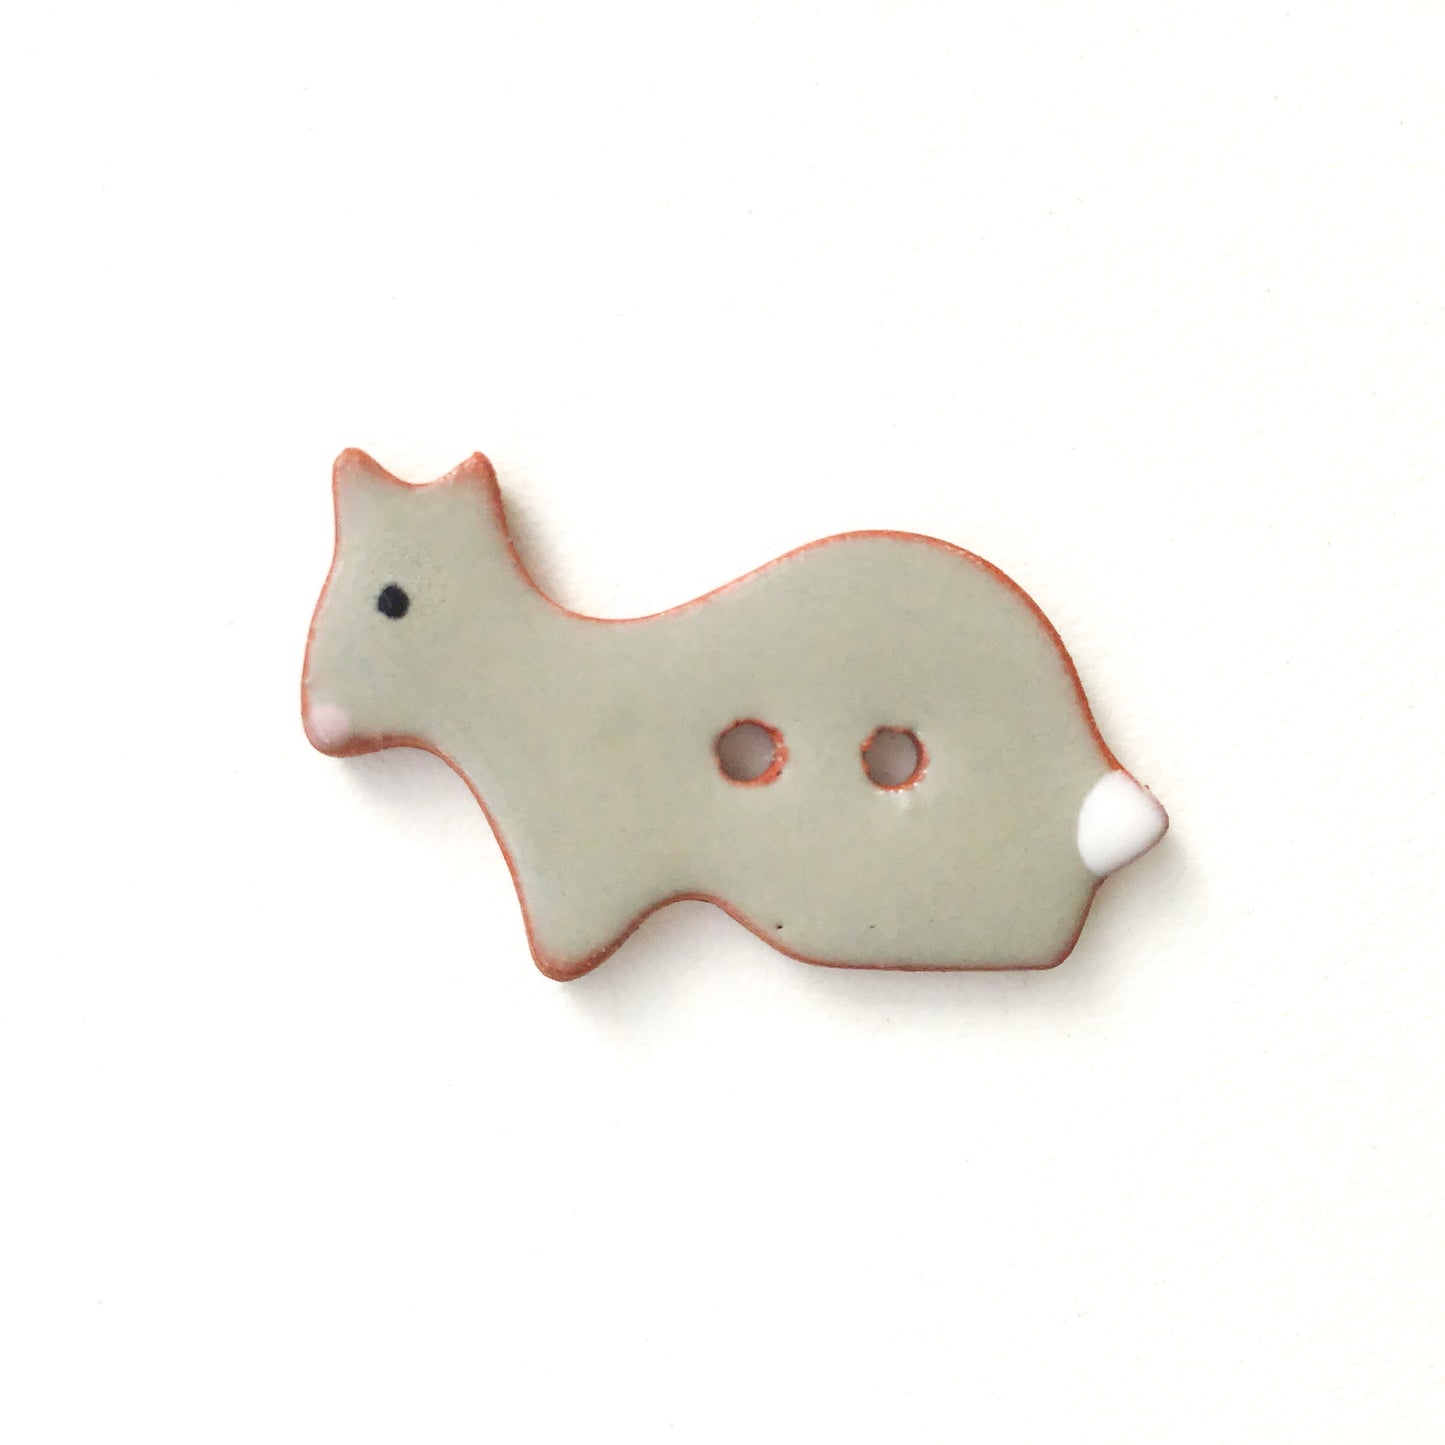 Bunny Ceramic Buttons - Clay Rabbit Buttons - 1 1/8" x 5/8"